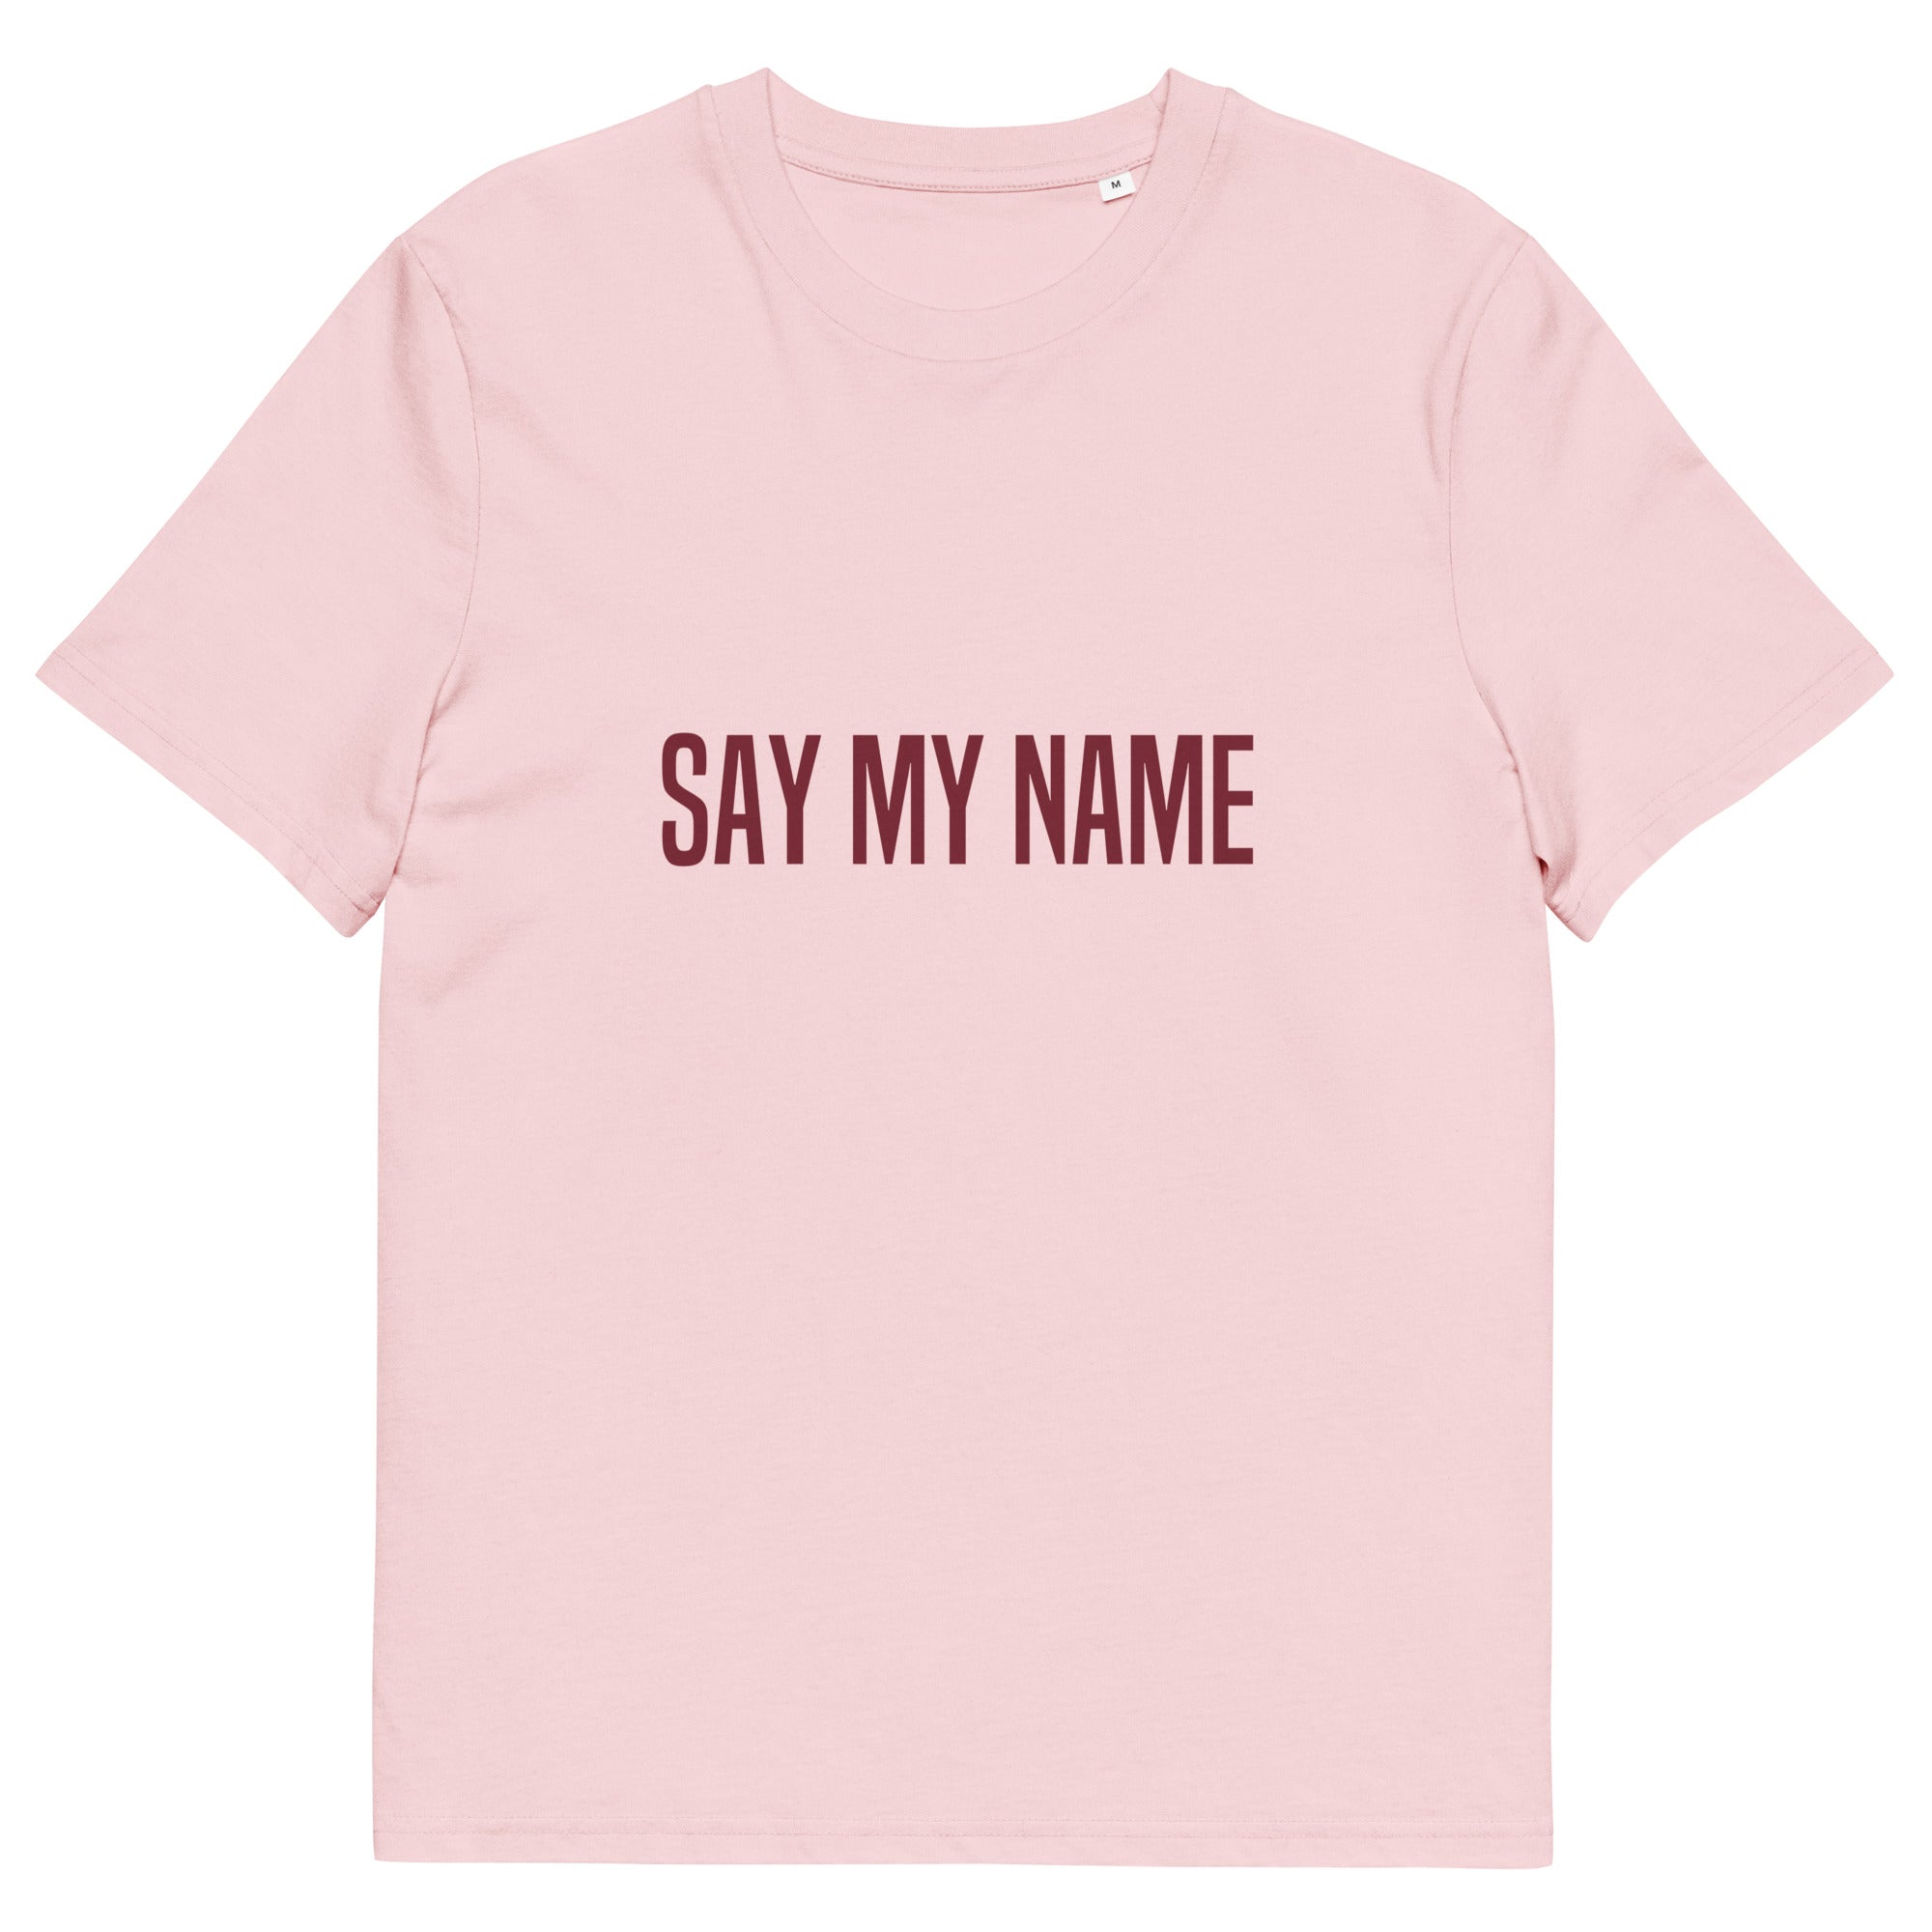 SUMMER T-SHIRT Pale pink CSG Unisex “SAY MY NAME”